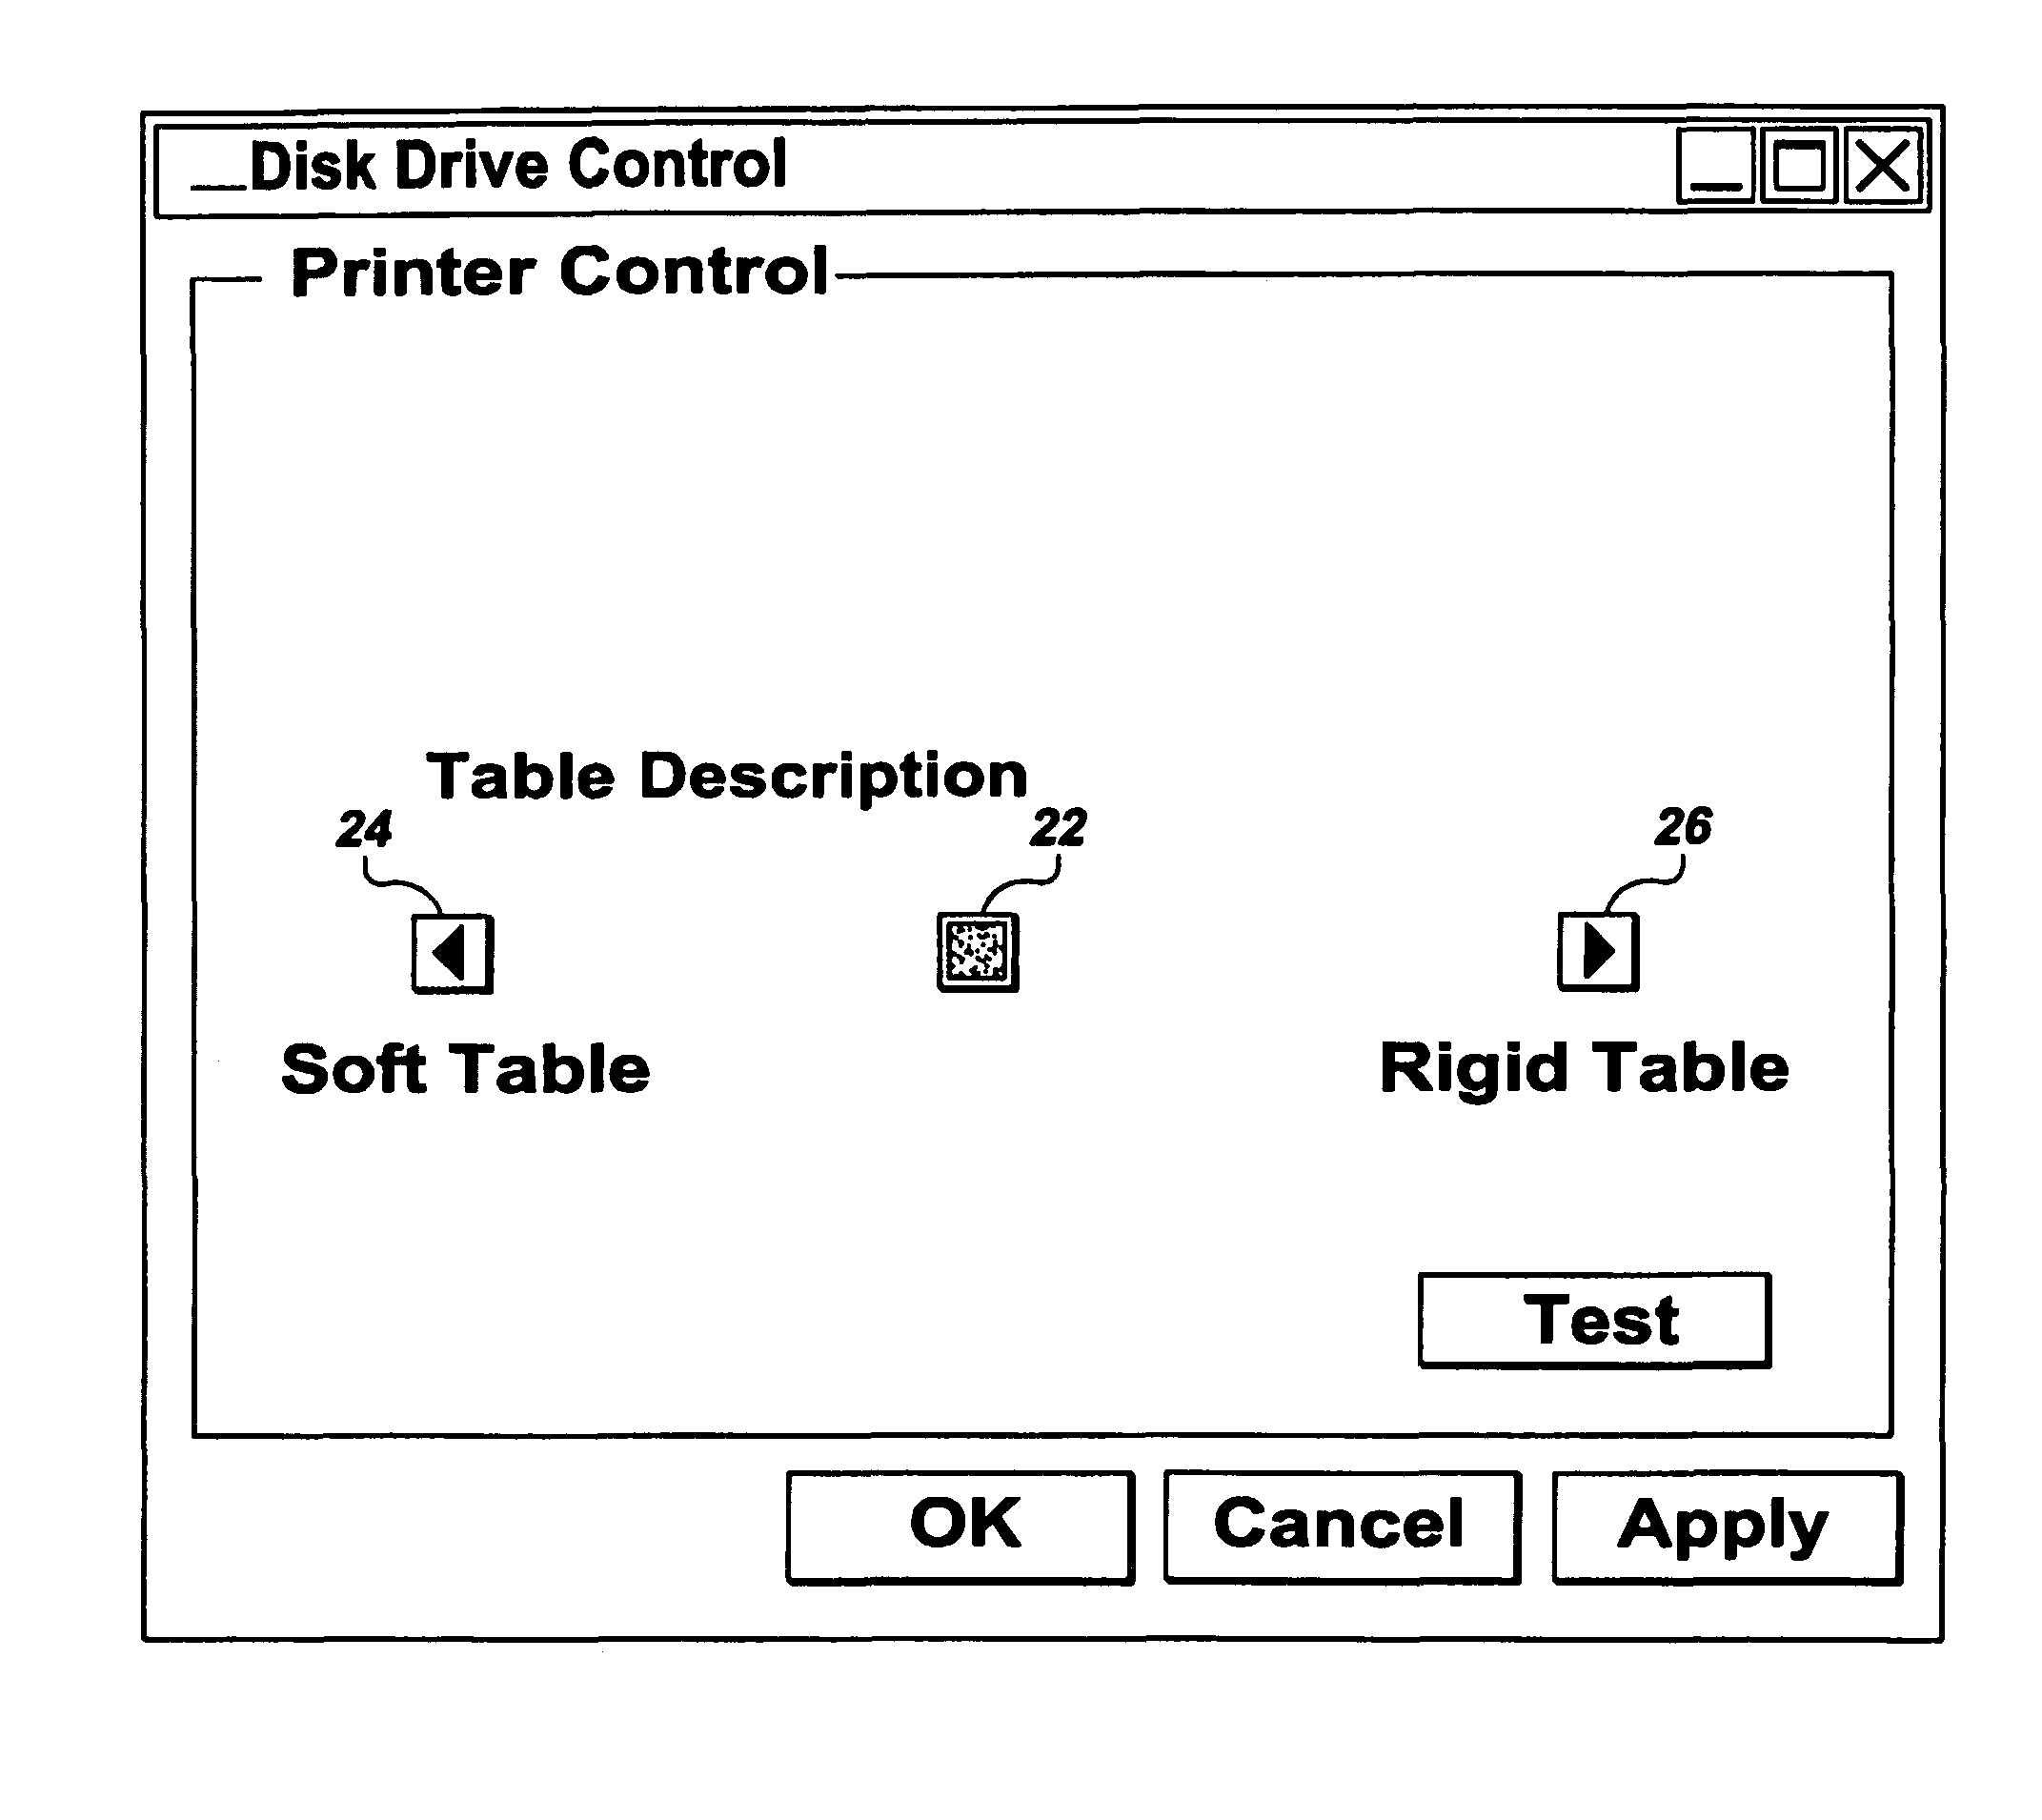 Vibration control technology and interface for computer printers and scanners